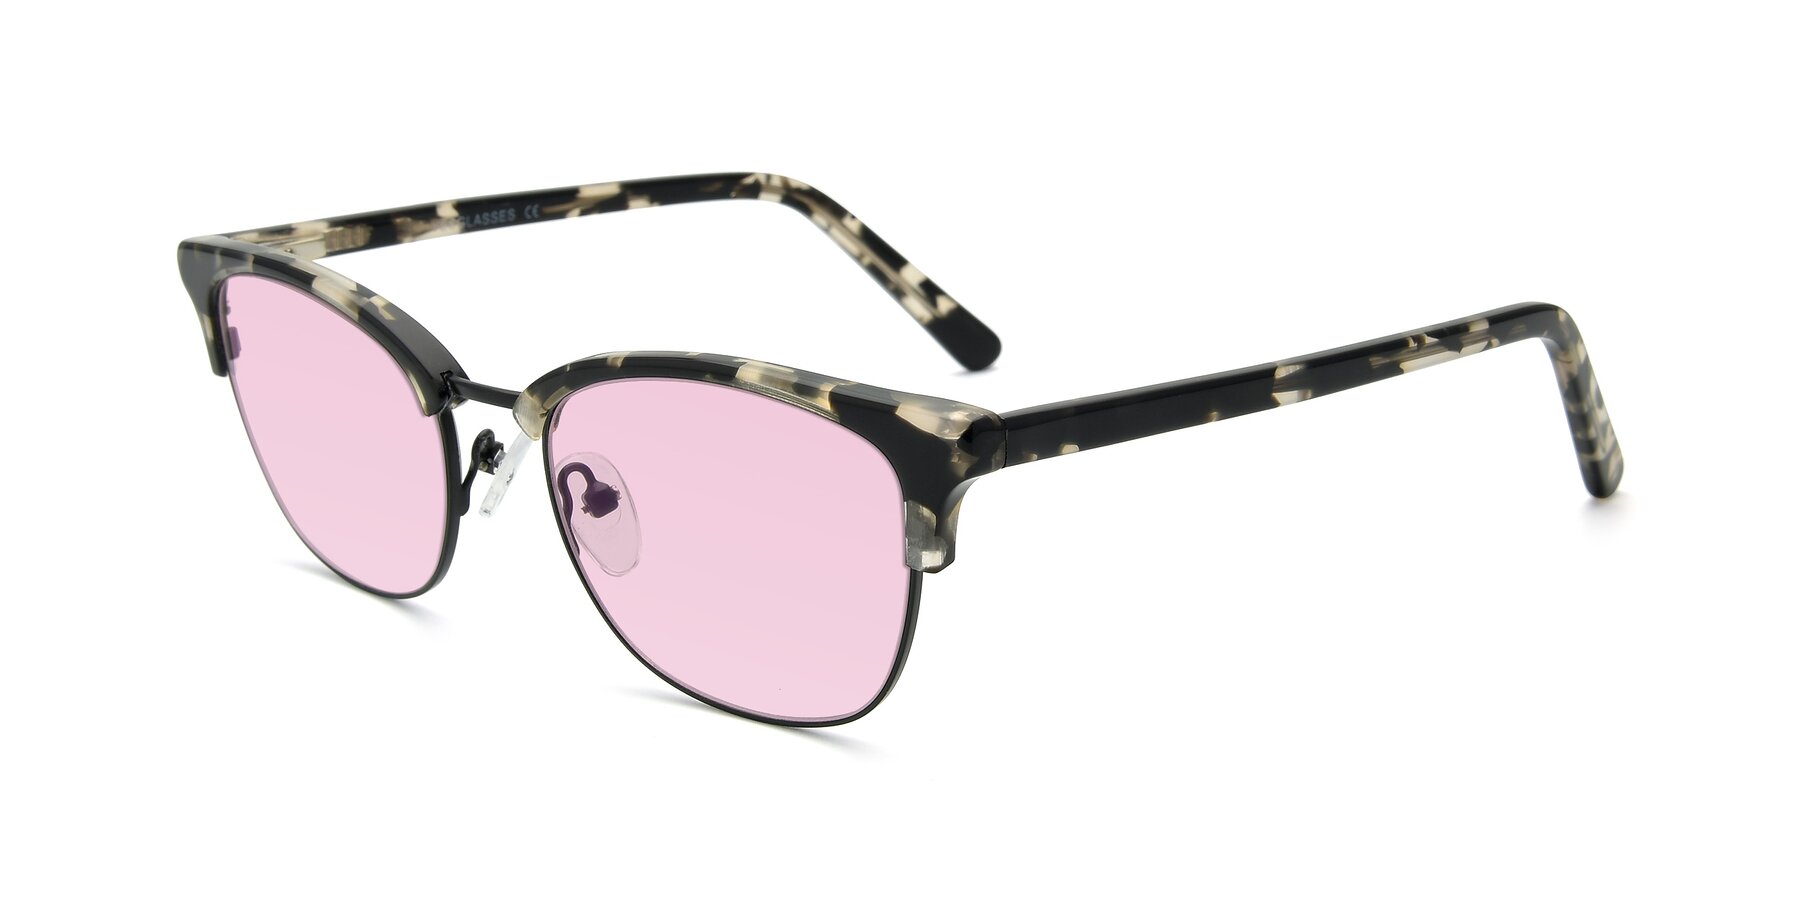 Angle of 17463 in Black-Tortoise with Light Pink Tinted Lenses